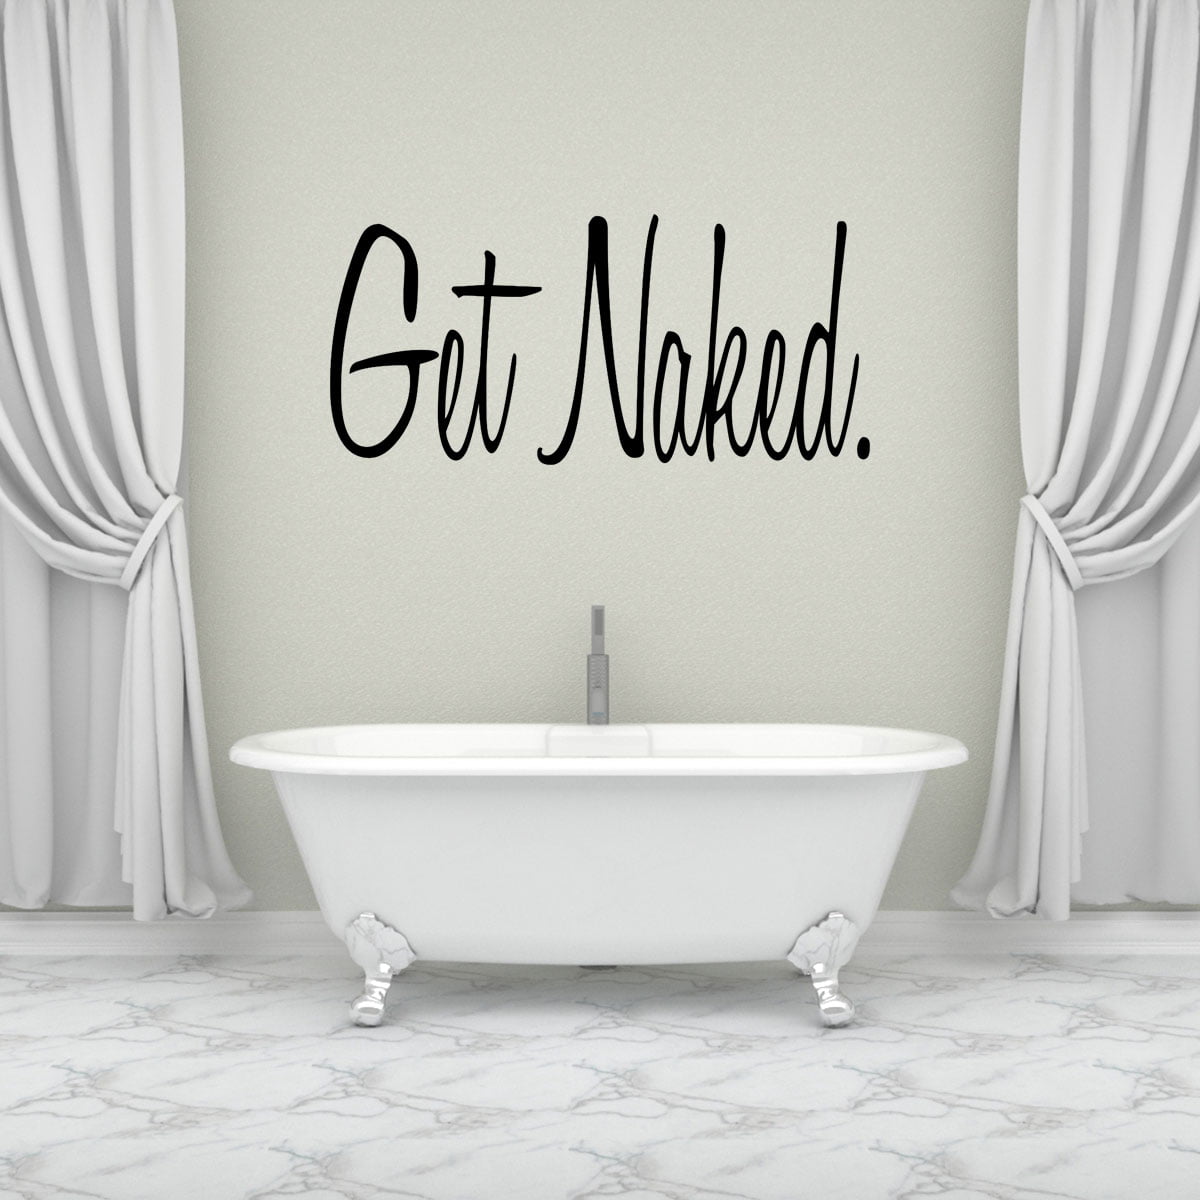 Get Naked Wall Sticker 